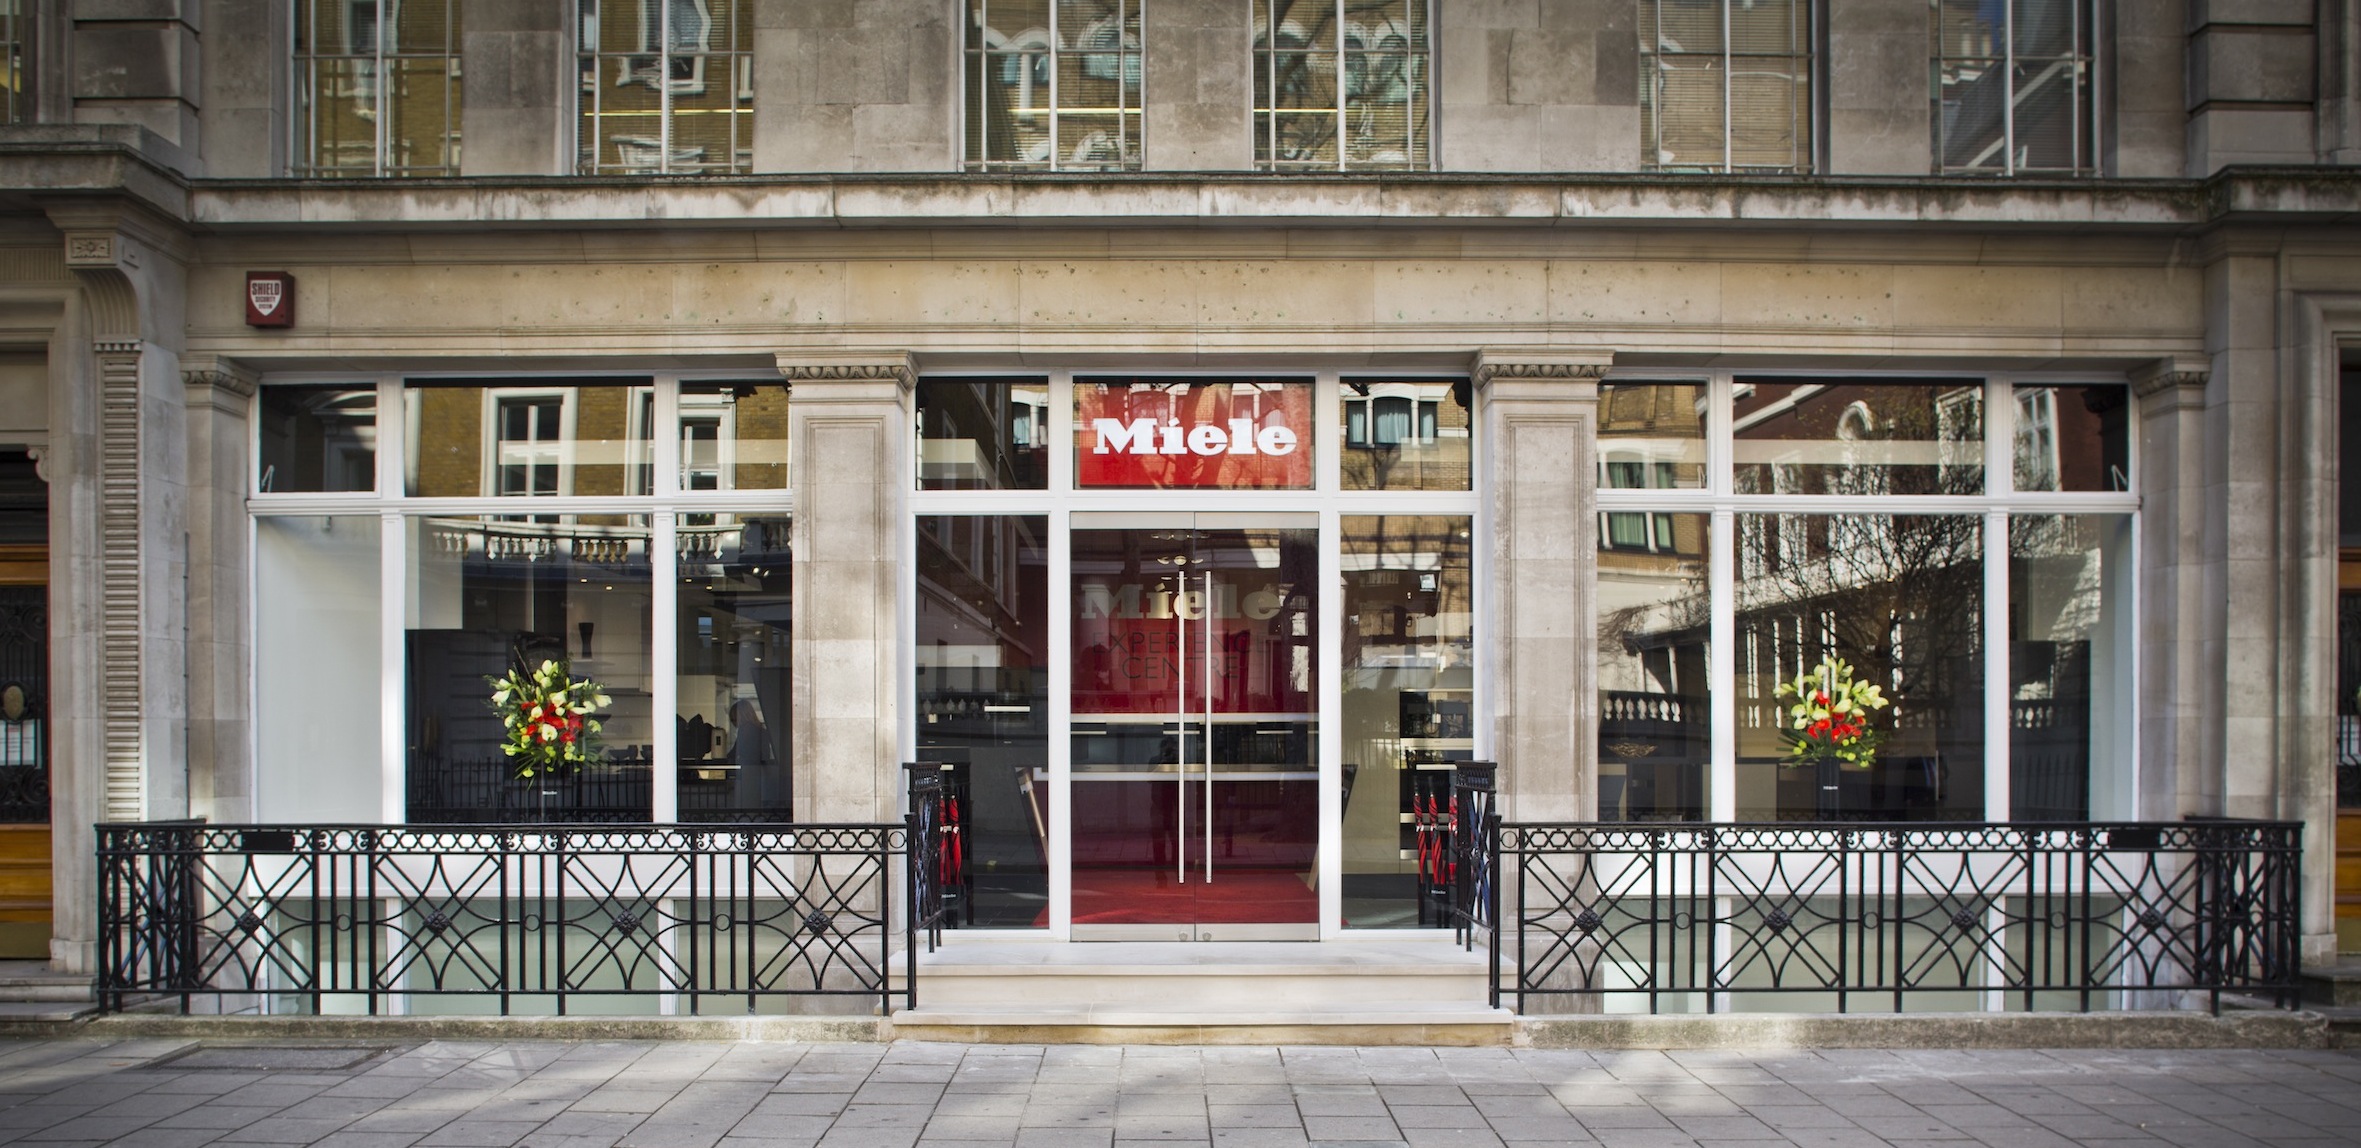 Miele reopens Flagship London Experience Centre   Neil Lerner Kitchen ...